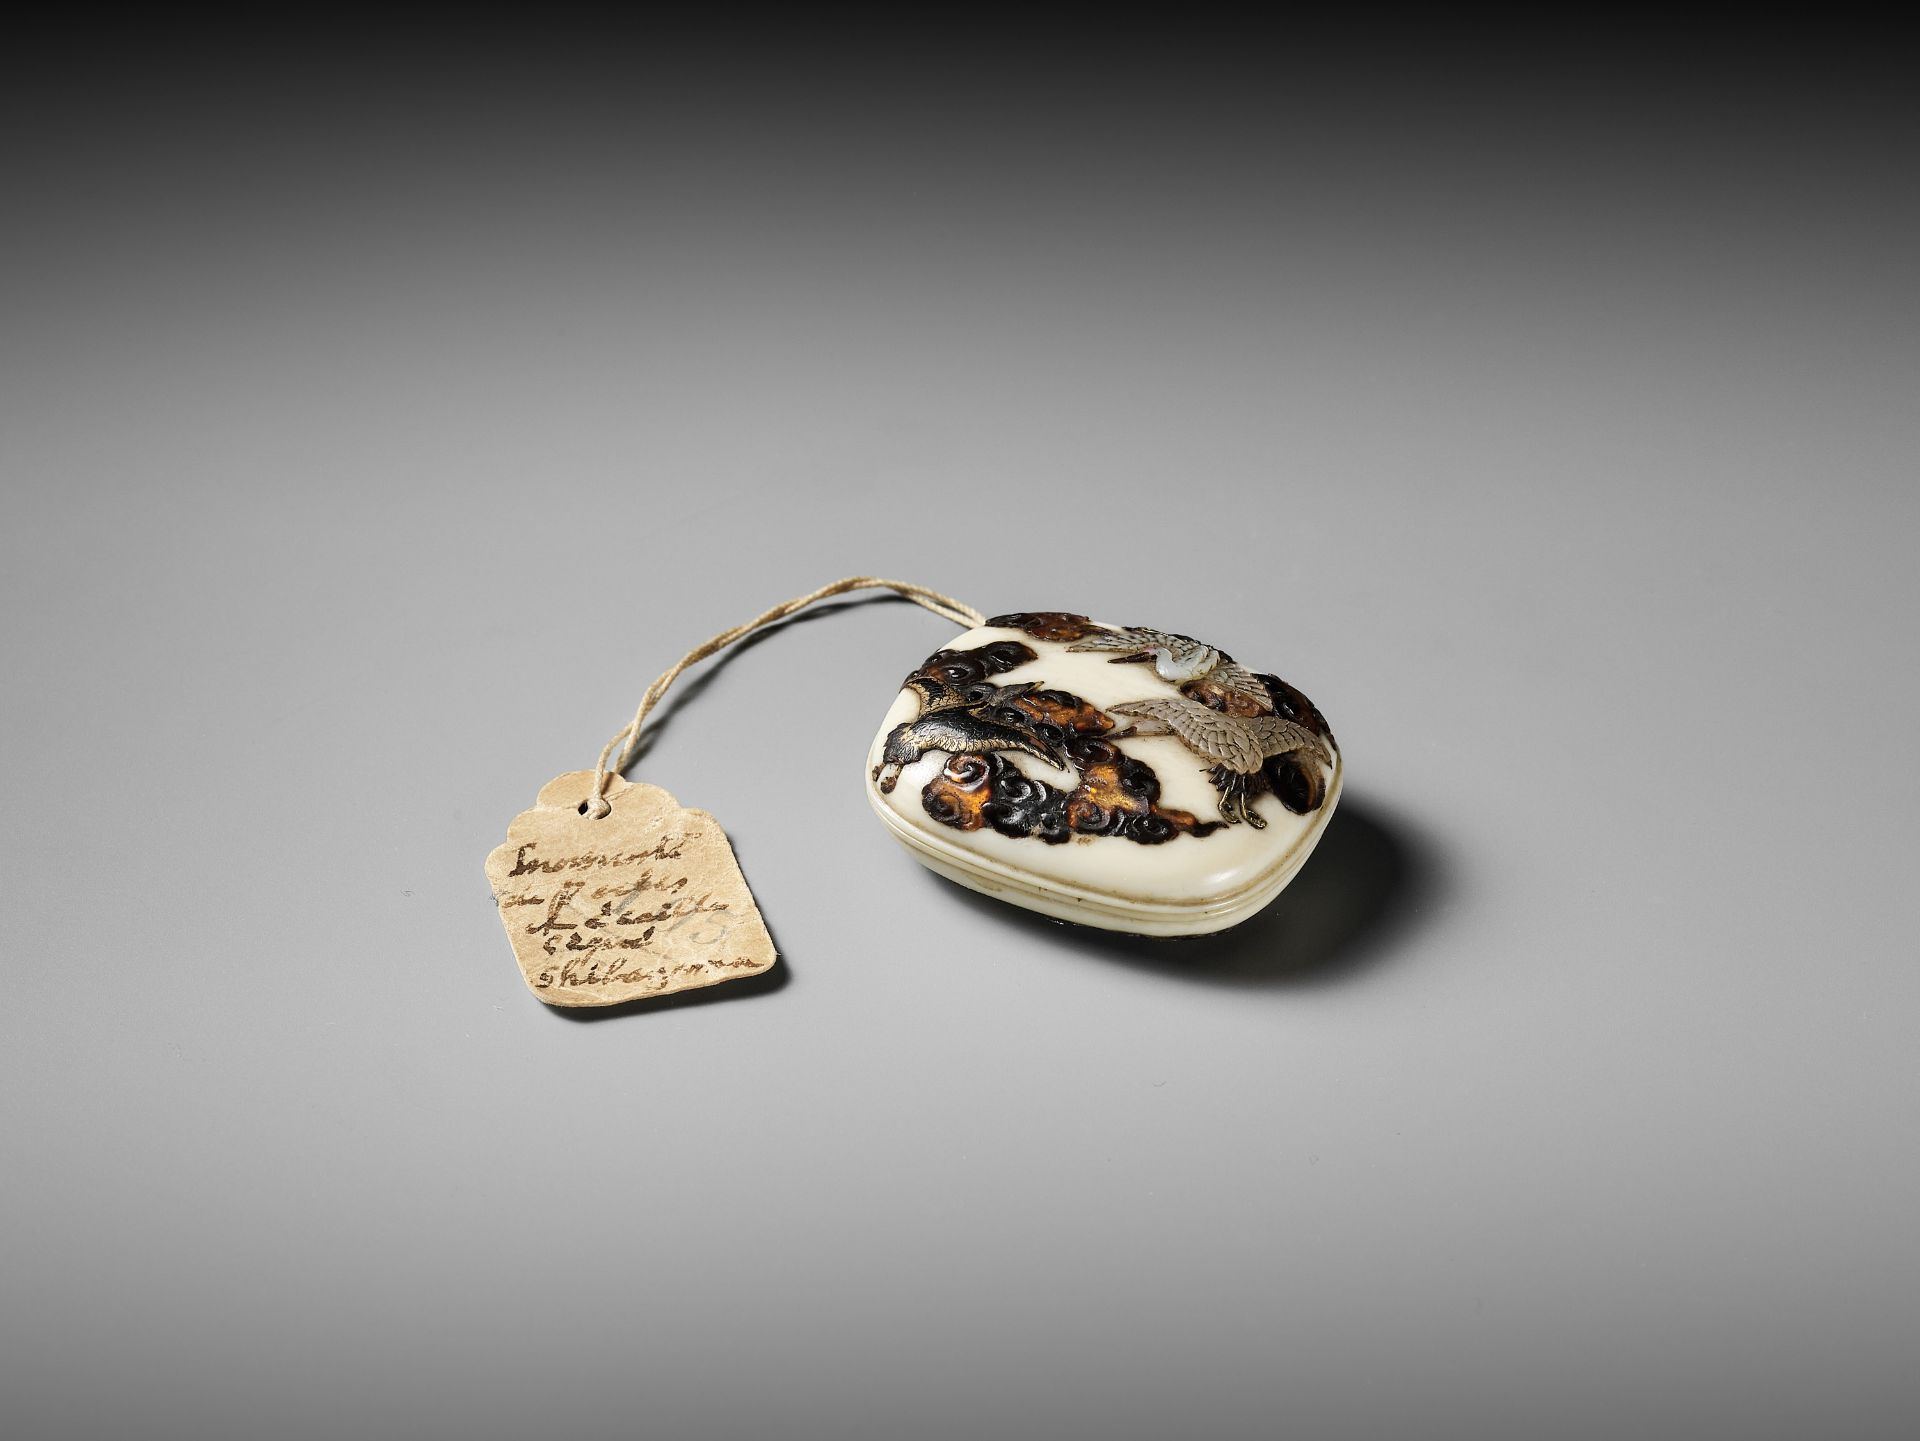 SHIBAYAMA: A FINE LACQUERED AND INLAID IVORY MANJU NETSUKE DEPICTING CRANES AND CLOUDS - Image 5 of 9